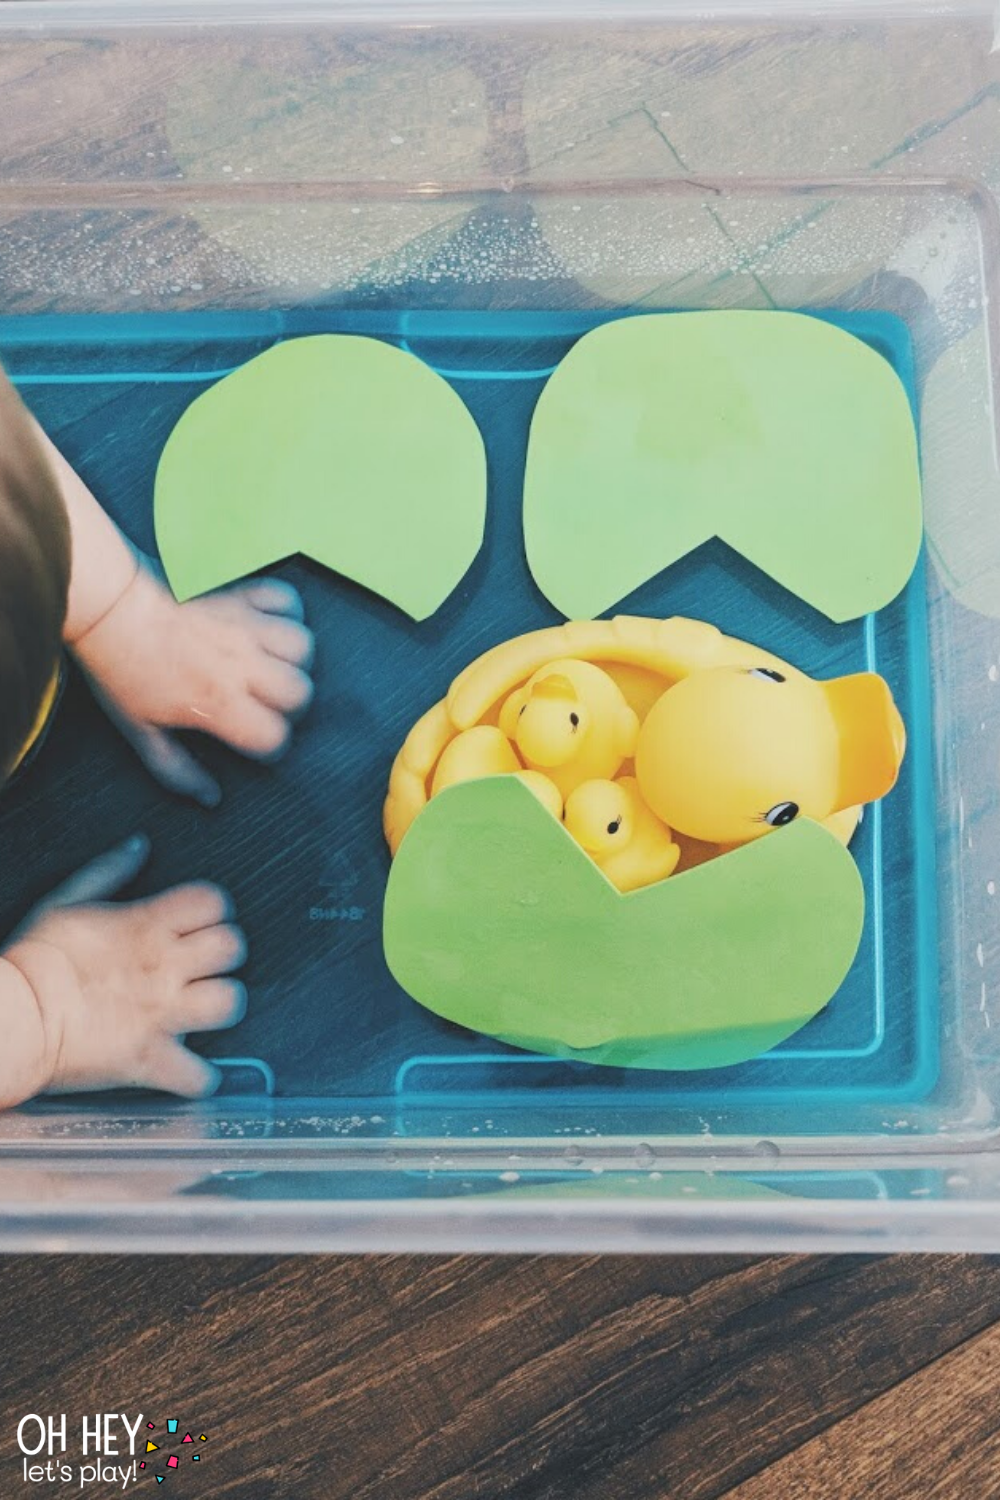 5 Little Ducks Sensory Play 2 30+ Activities for 1-2 Year Old Toddlers - Oh Hey Let's Play www.ohheyletsplay.com.png